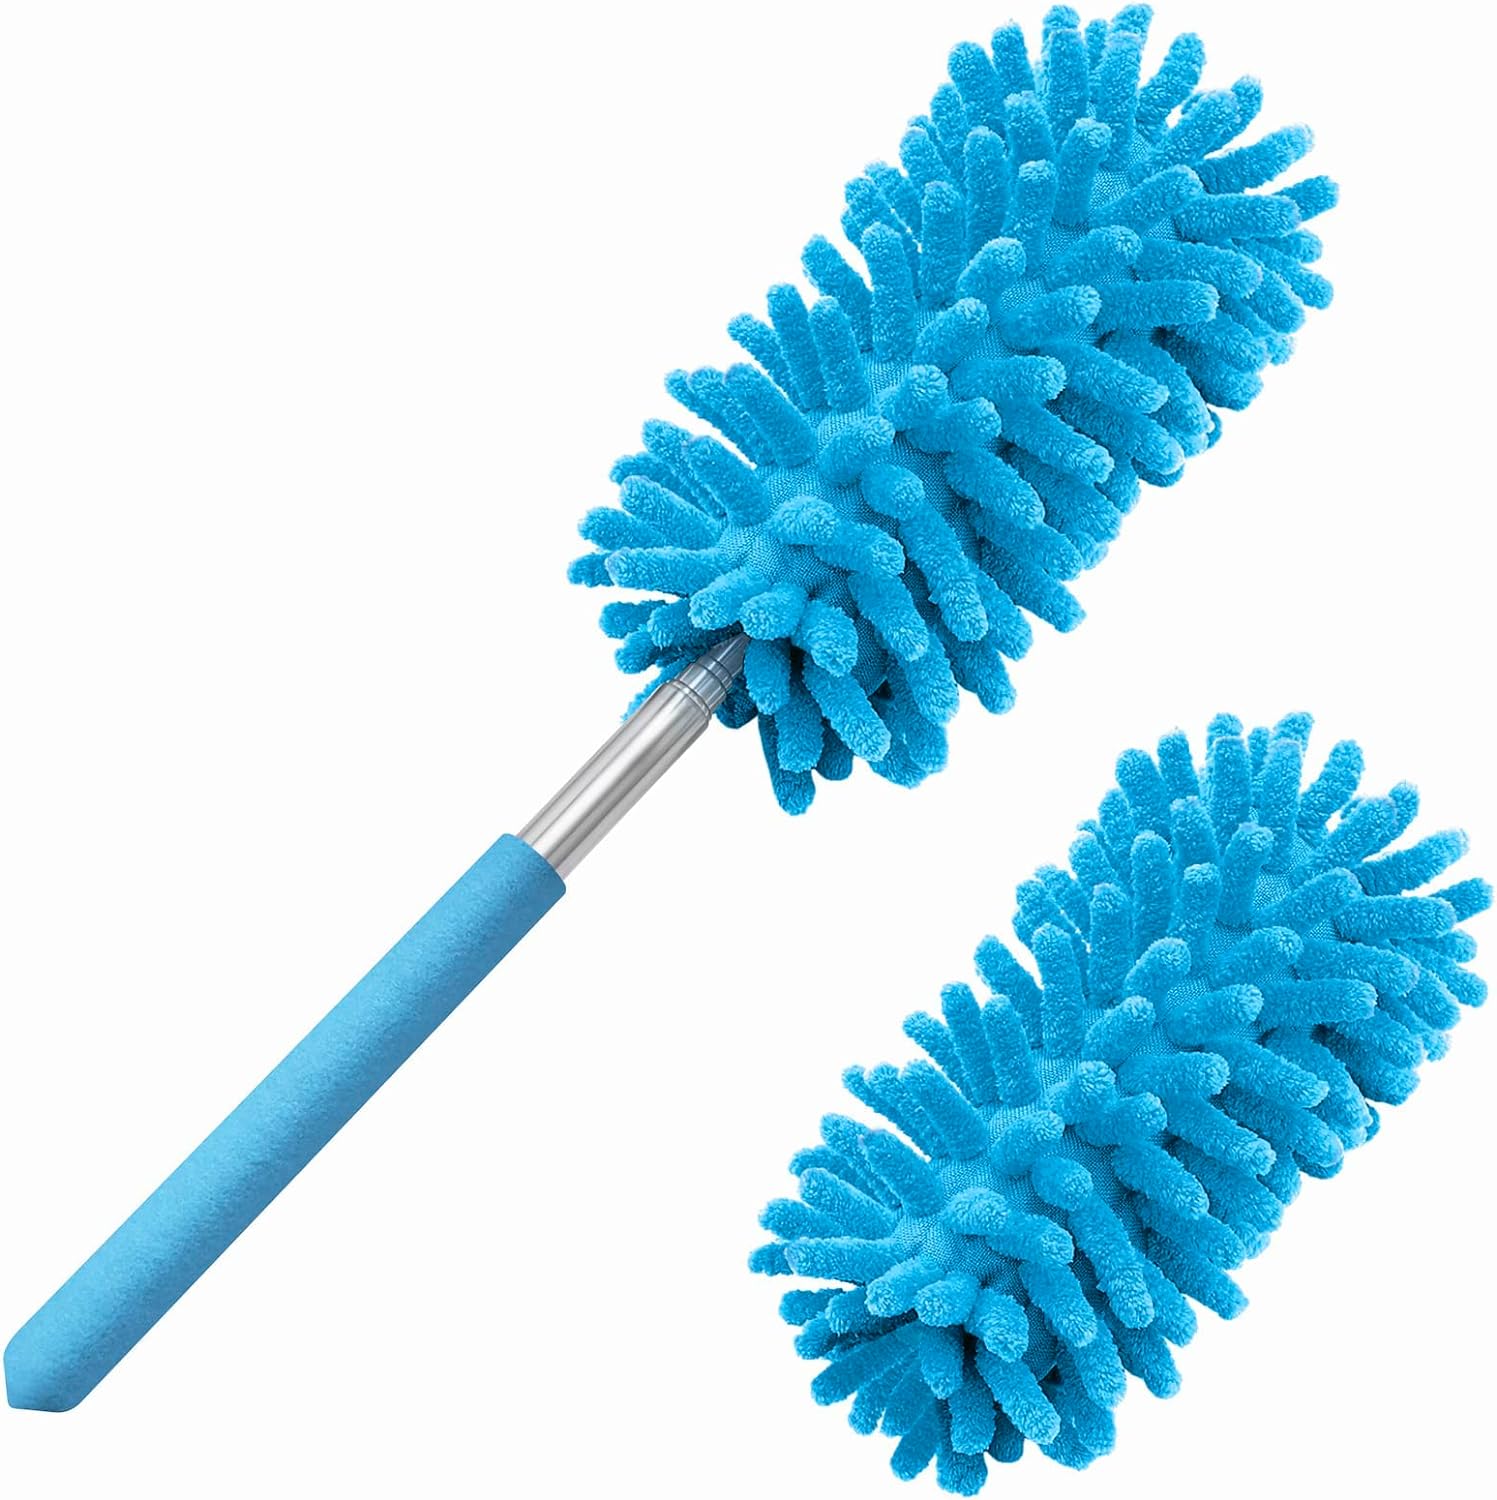 Telescopic Microfiber Duster With Pivot Head - Extends Up To 29 inches